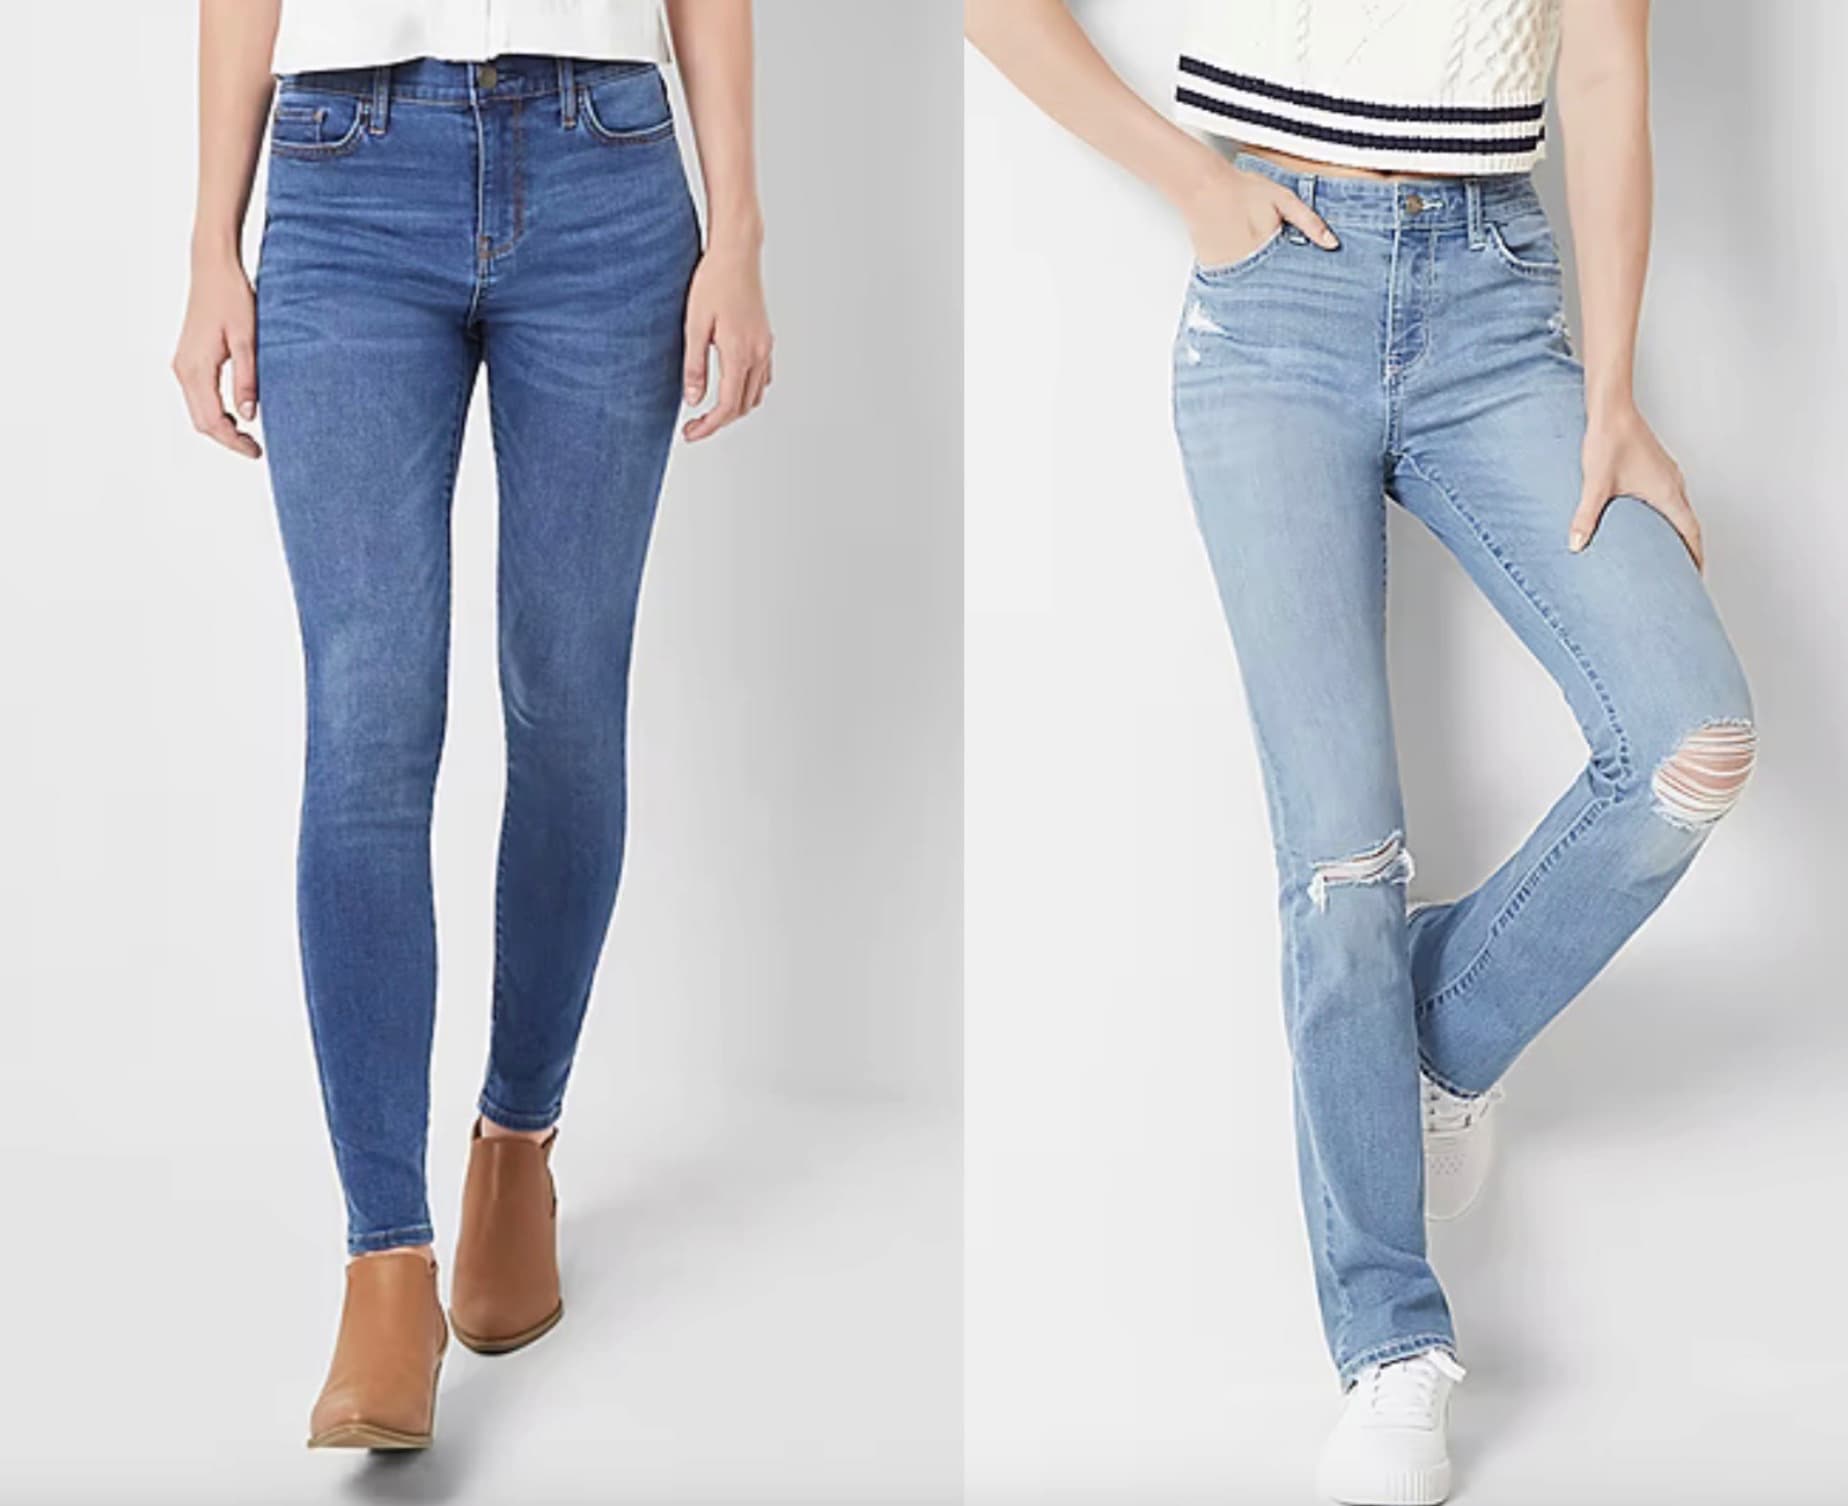 Women's Jeans as low as $14.99 at JCPenney! | Money Saving Mom®